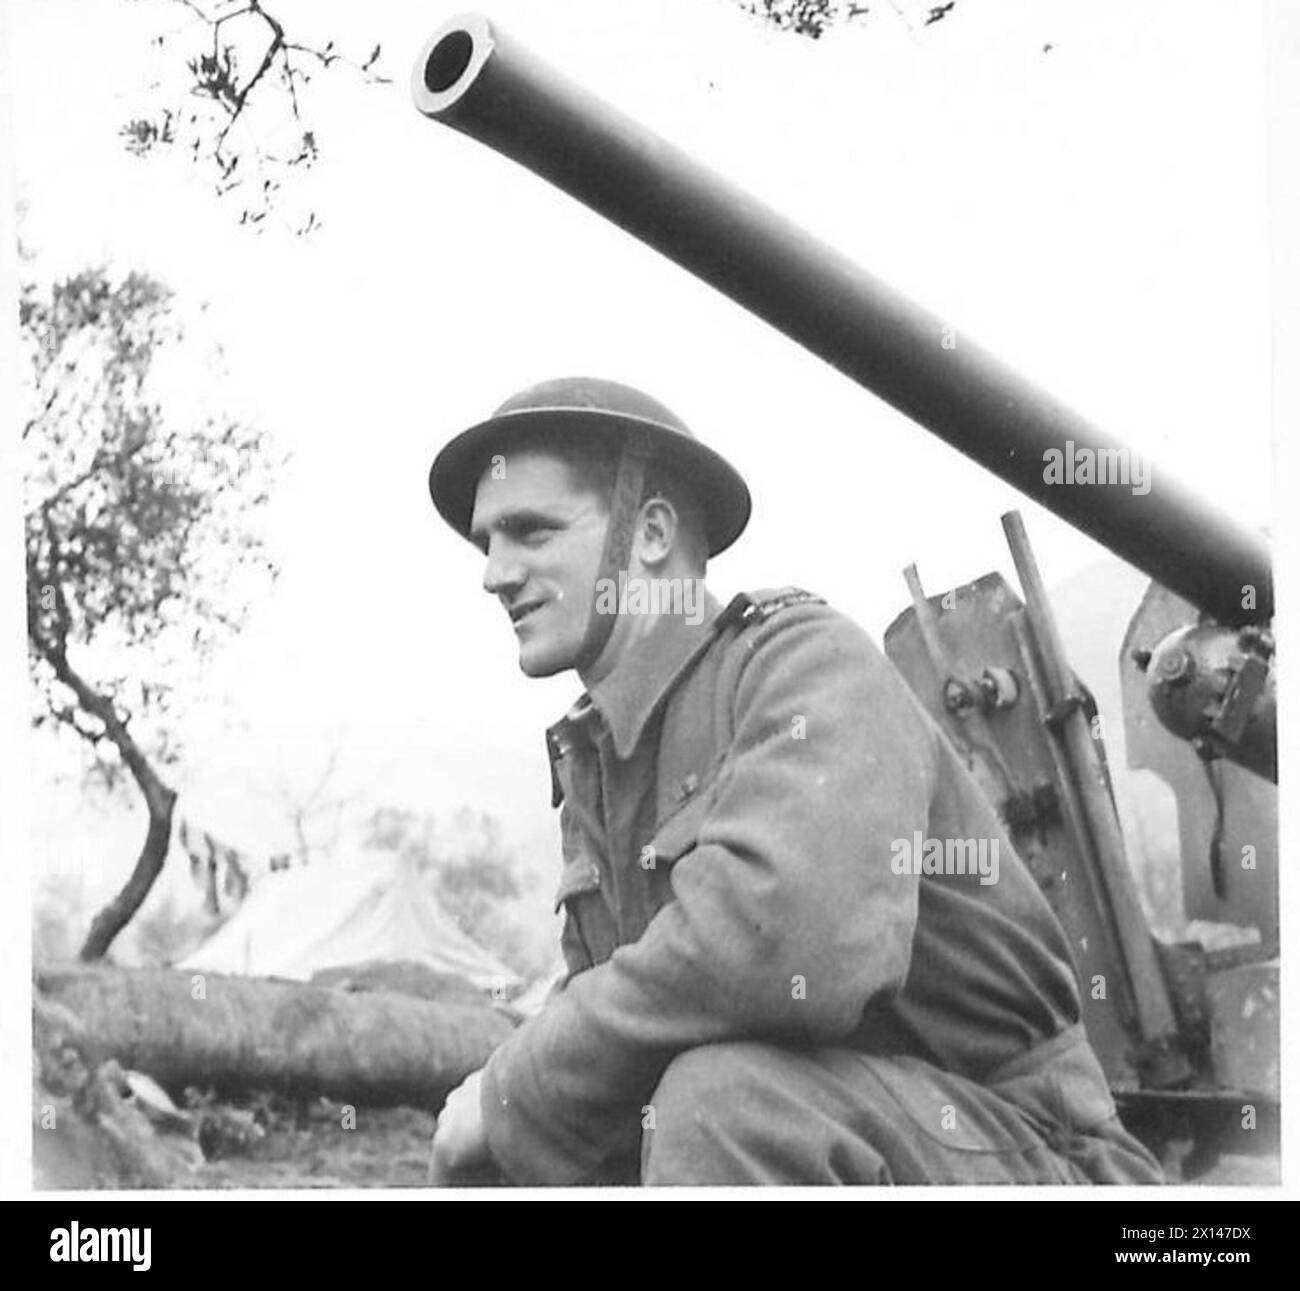 ITALY : FIFTH ARMYSPOT LIGHT ON THE KIWIS - Anti-Tank S/Sgt. W.J. Butler of the 22nd Motorised Battalion, N.Z. Division. 'I think that we will go through them alright. My idea of a good time, is a grand game of rugger, followed by an evening at the Taratshi Hotel with my joker-pals. That's just the 'caper'.' Sgt. Butler is 22 years of age and has been overseas for 3 years. Used to be a fanner, he hails from Solway, Masterton, N.Z British Army Stock Photo